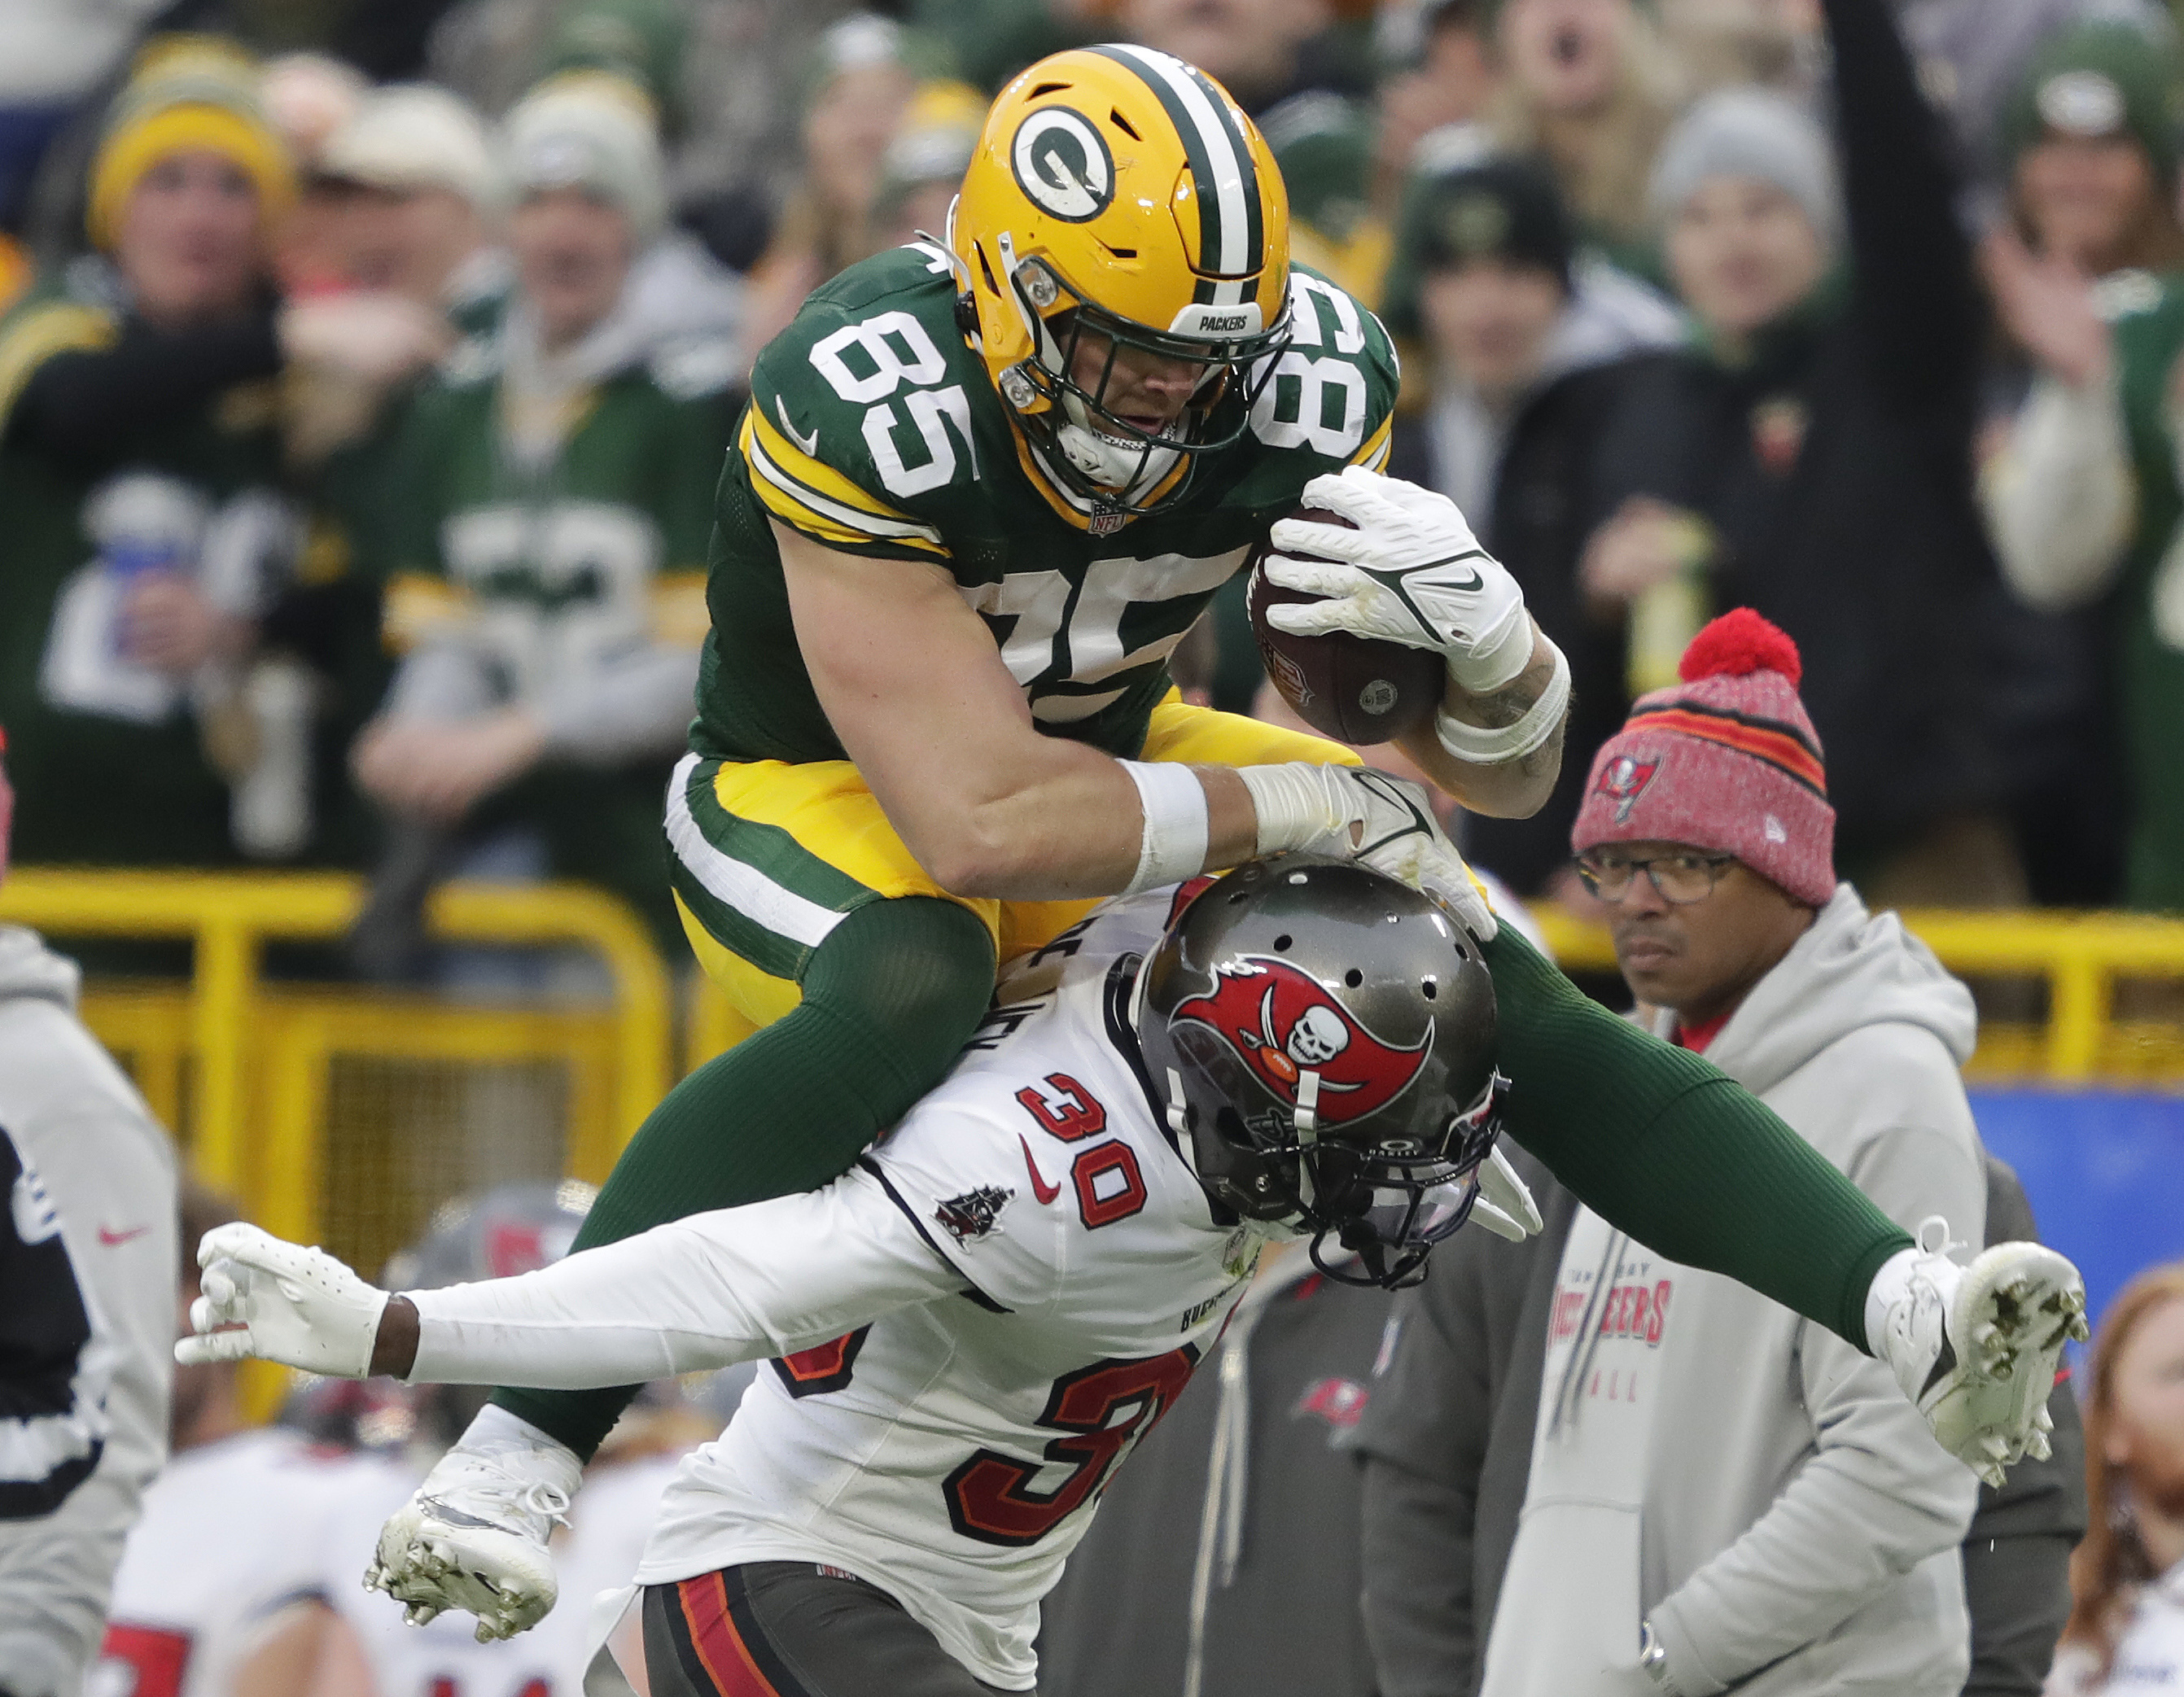 Green Bay Packers Vs. Tampa Bay Buccaneers: Who Has The Edge?